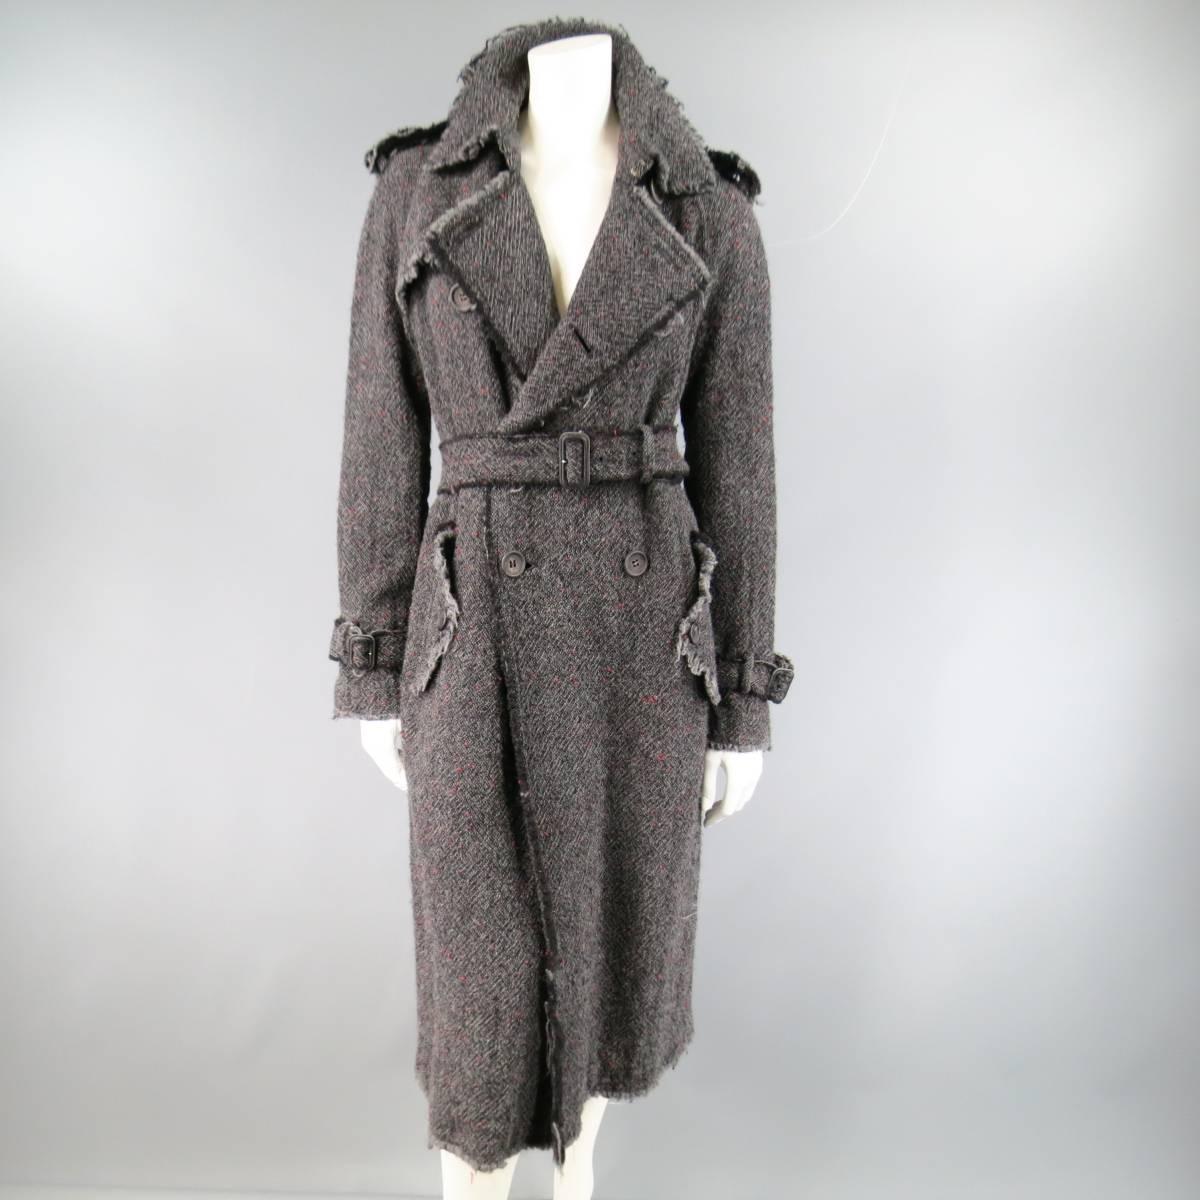 This gorgeous JUNYA WATANABE COMME des GARCONS trench coat comes in a charcoal grey tweed with hints of red and features a pointed collar, epaulets, double breasted button up closure, storm flap, double flap pockets, belted cuffs, matching fabric